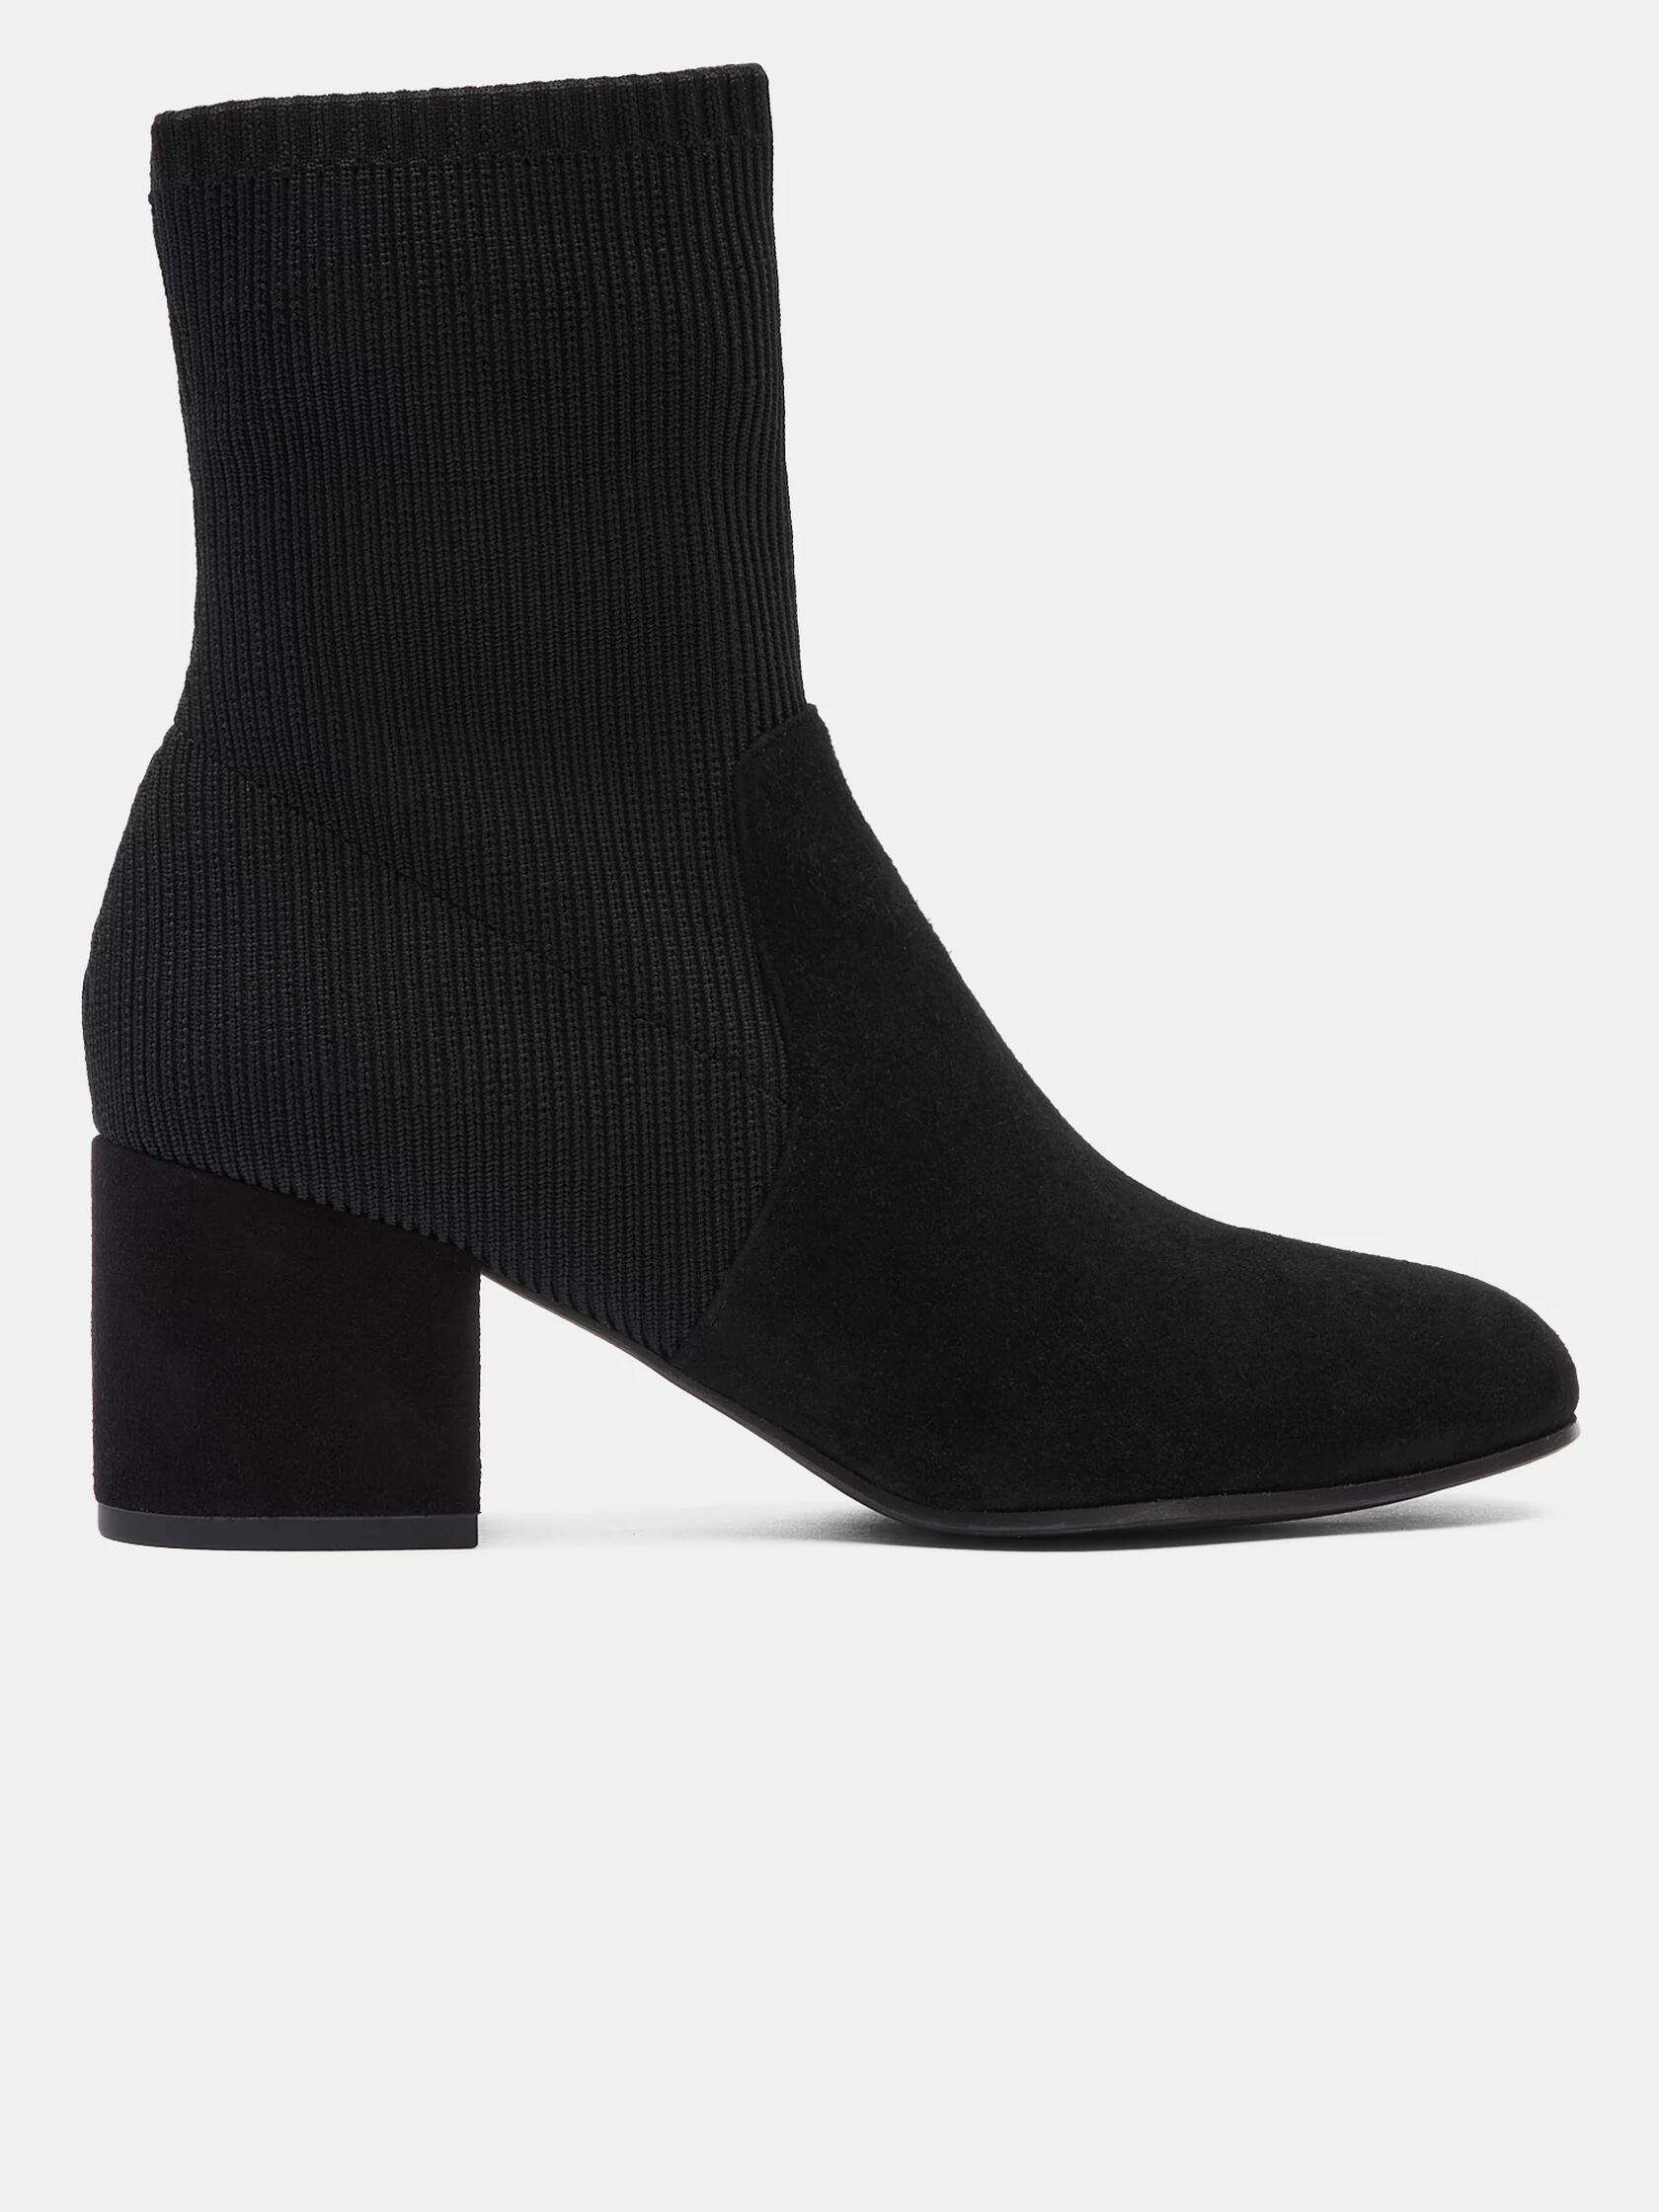 Knolls Suede & Recycled Stretch Knit Sock Boot